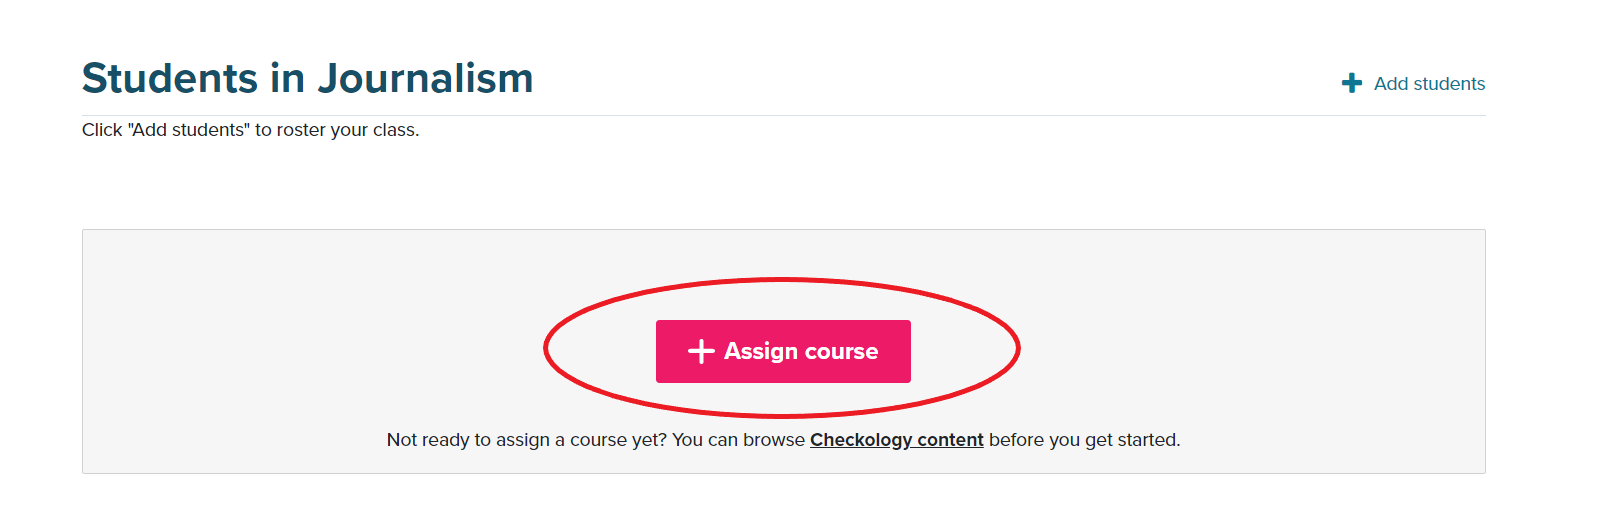 Assign_course_prompt2.png